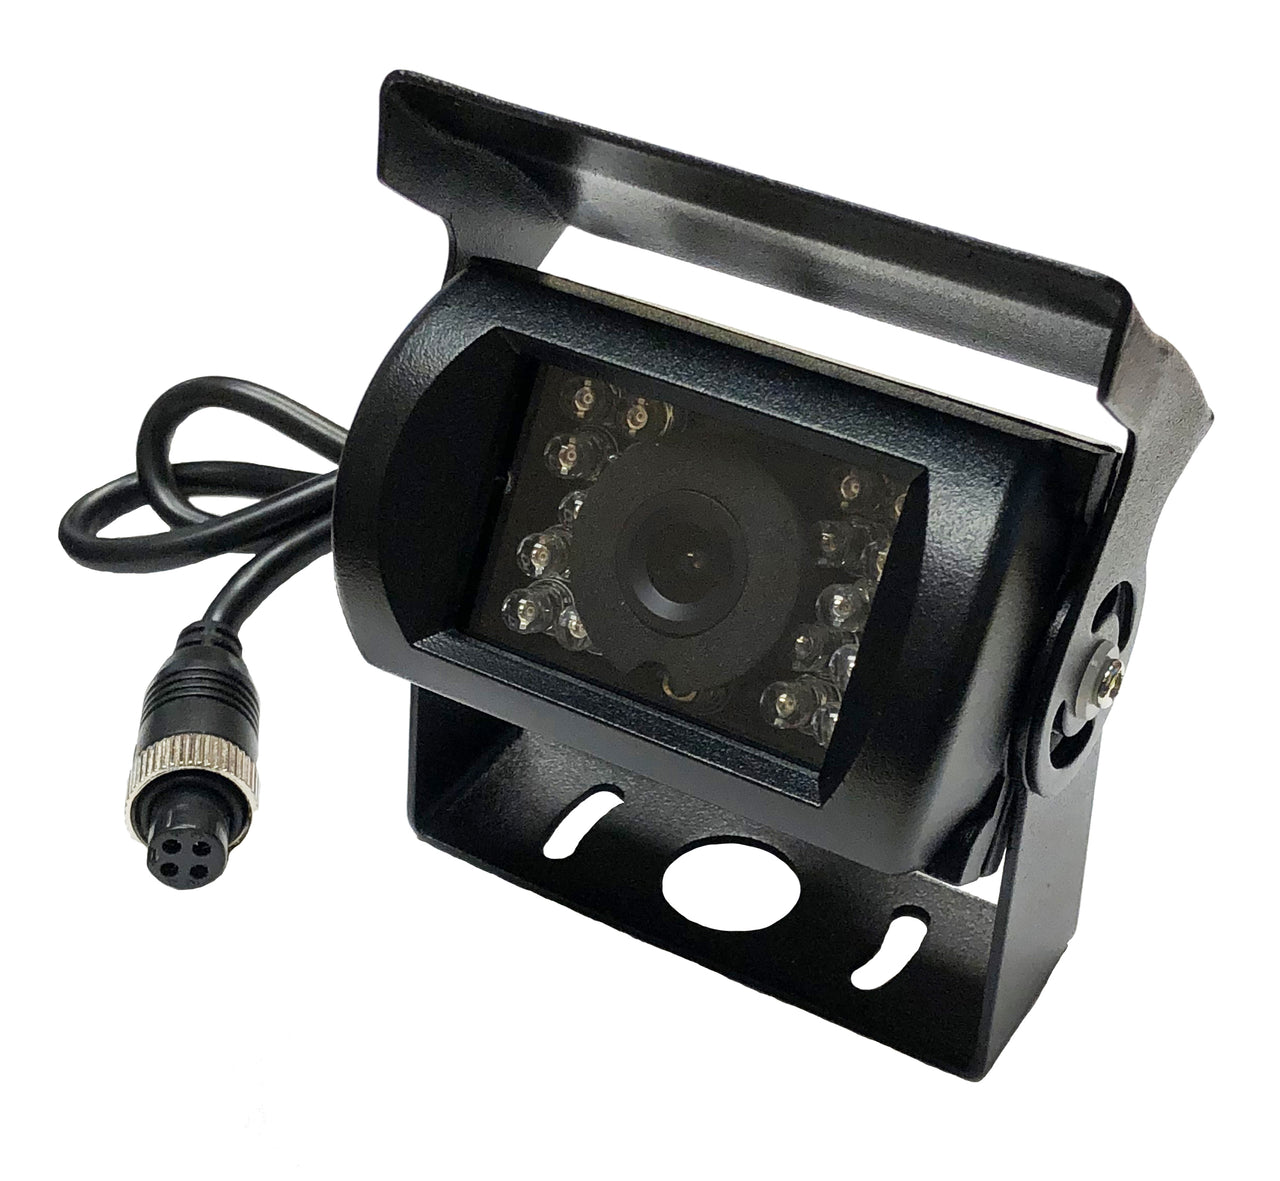 Crux CTM-11YBM Commercial Grade Top Mount Camera with 1/3” Sony CCD Sensor, IR LEDs and Built-in Microphone